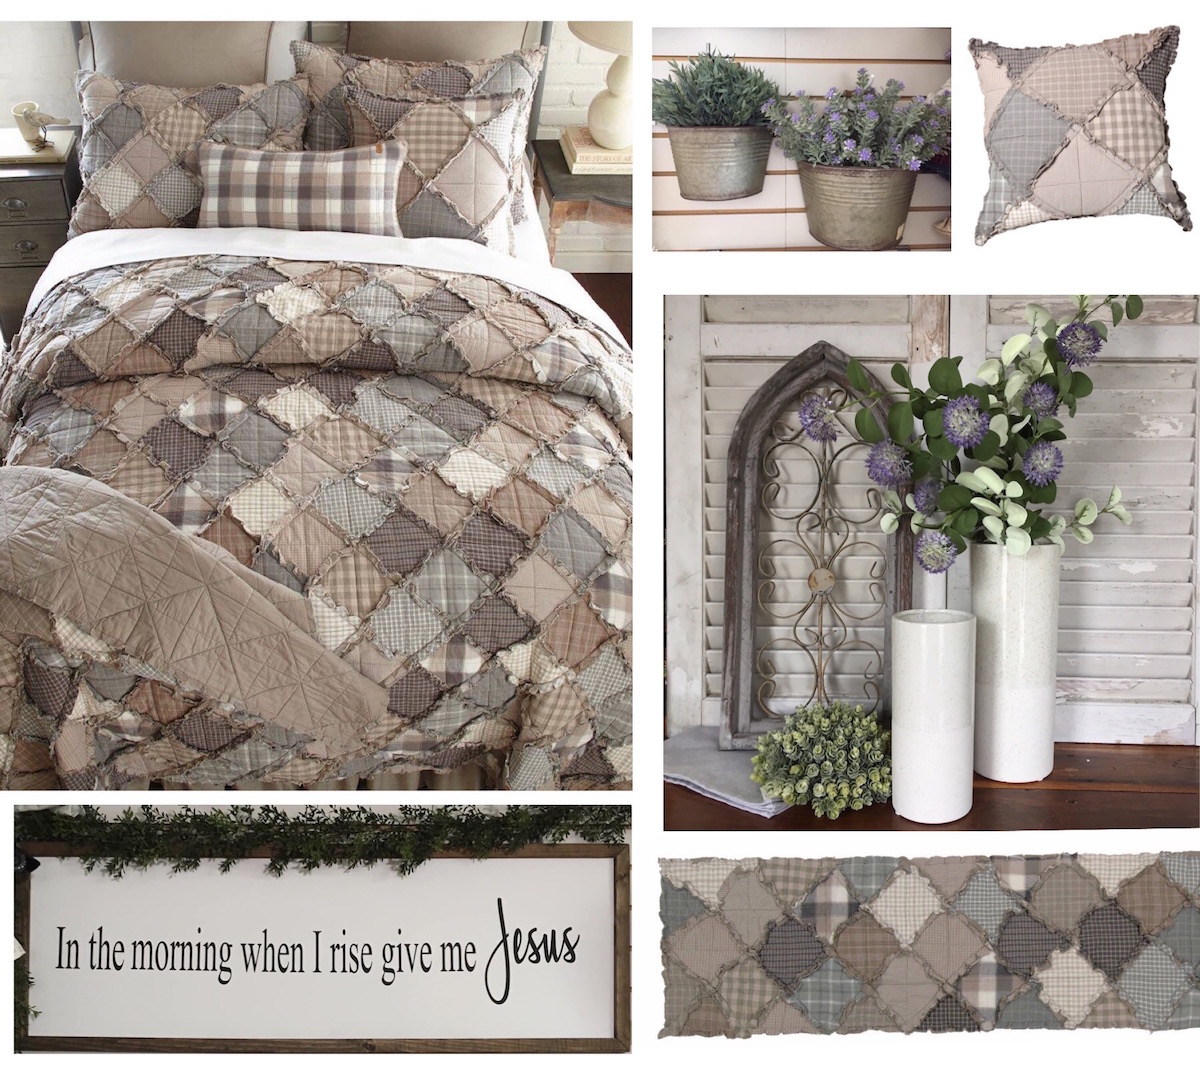 DONNA SHARP SMOKY MOUNTAIN PATCHWORK TRADITIONAL RUSTIC QUILT COLLECTION